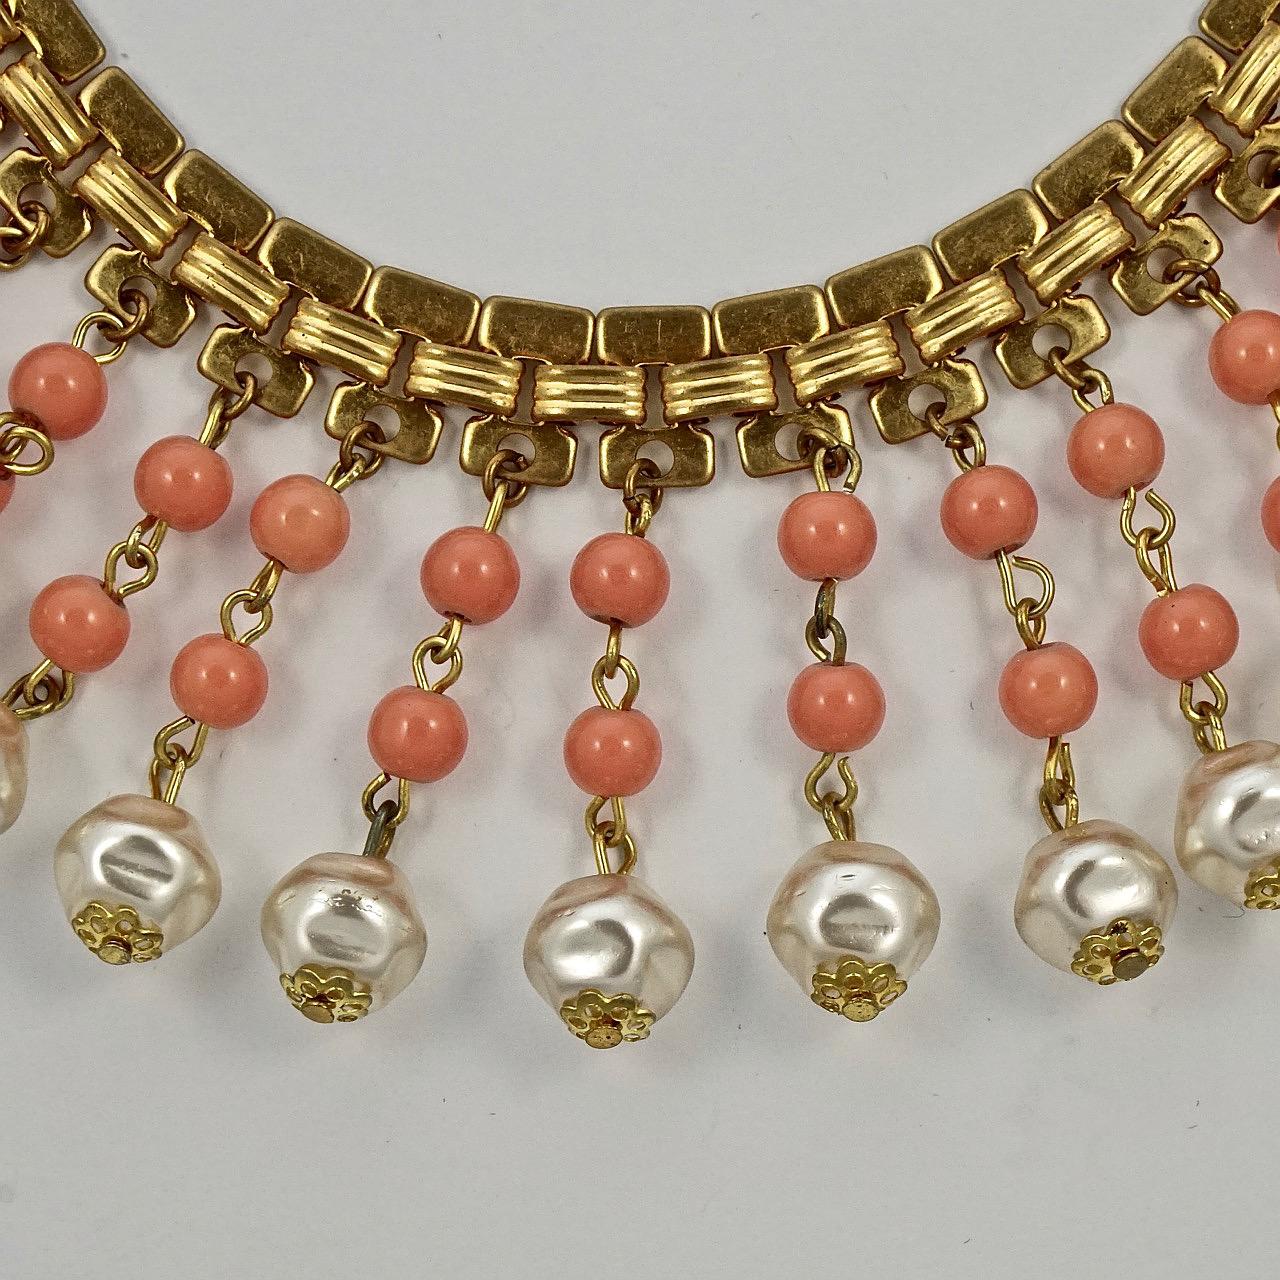 Fabulous gold plated link collar necklace, with beautiful coral glass bead and faux baroque pearl drops. Measuring necklace length 46.8 cm / 18.4 inches, and the coral and pearl drops are length 3.8 cm / 1.5 inches. The necklace is in very good